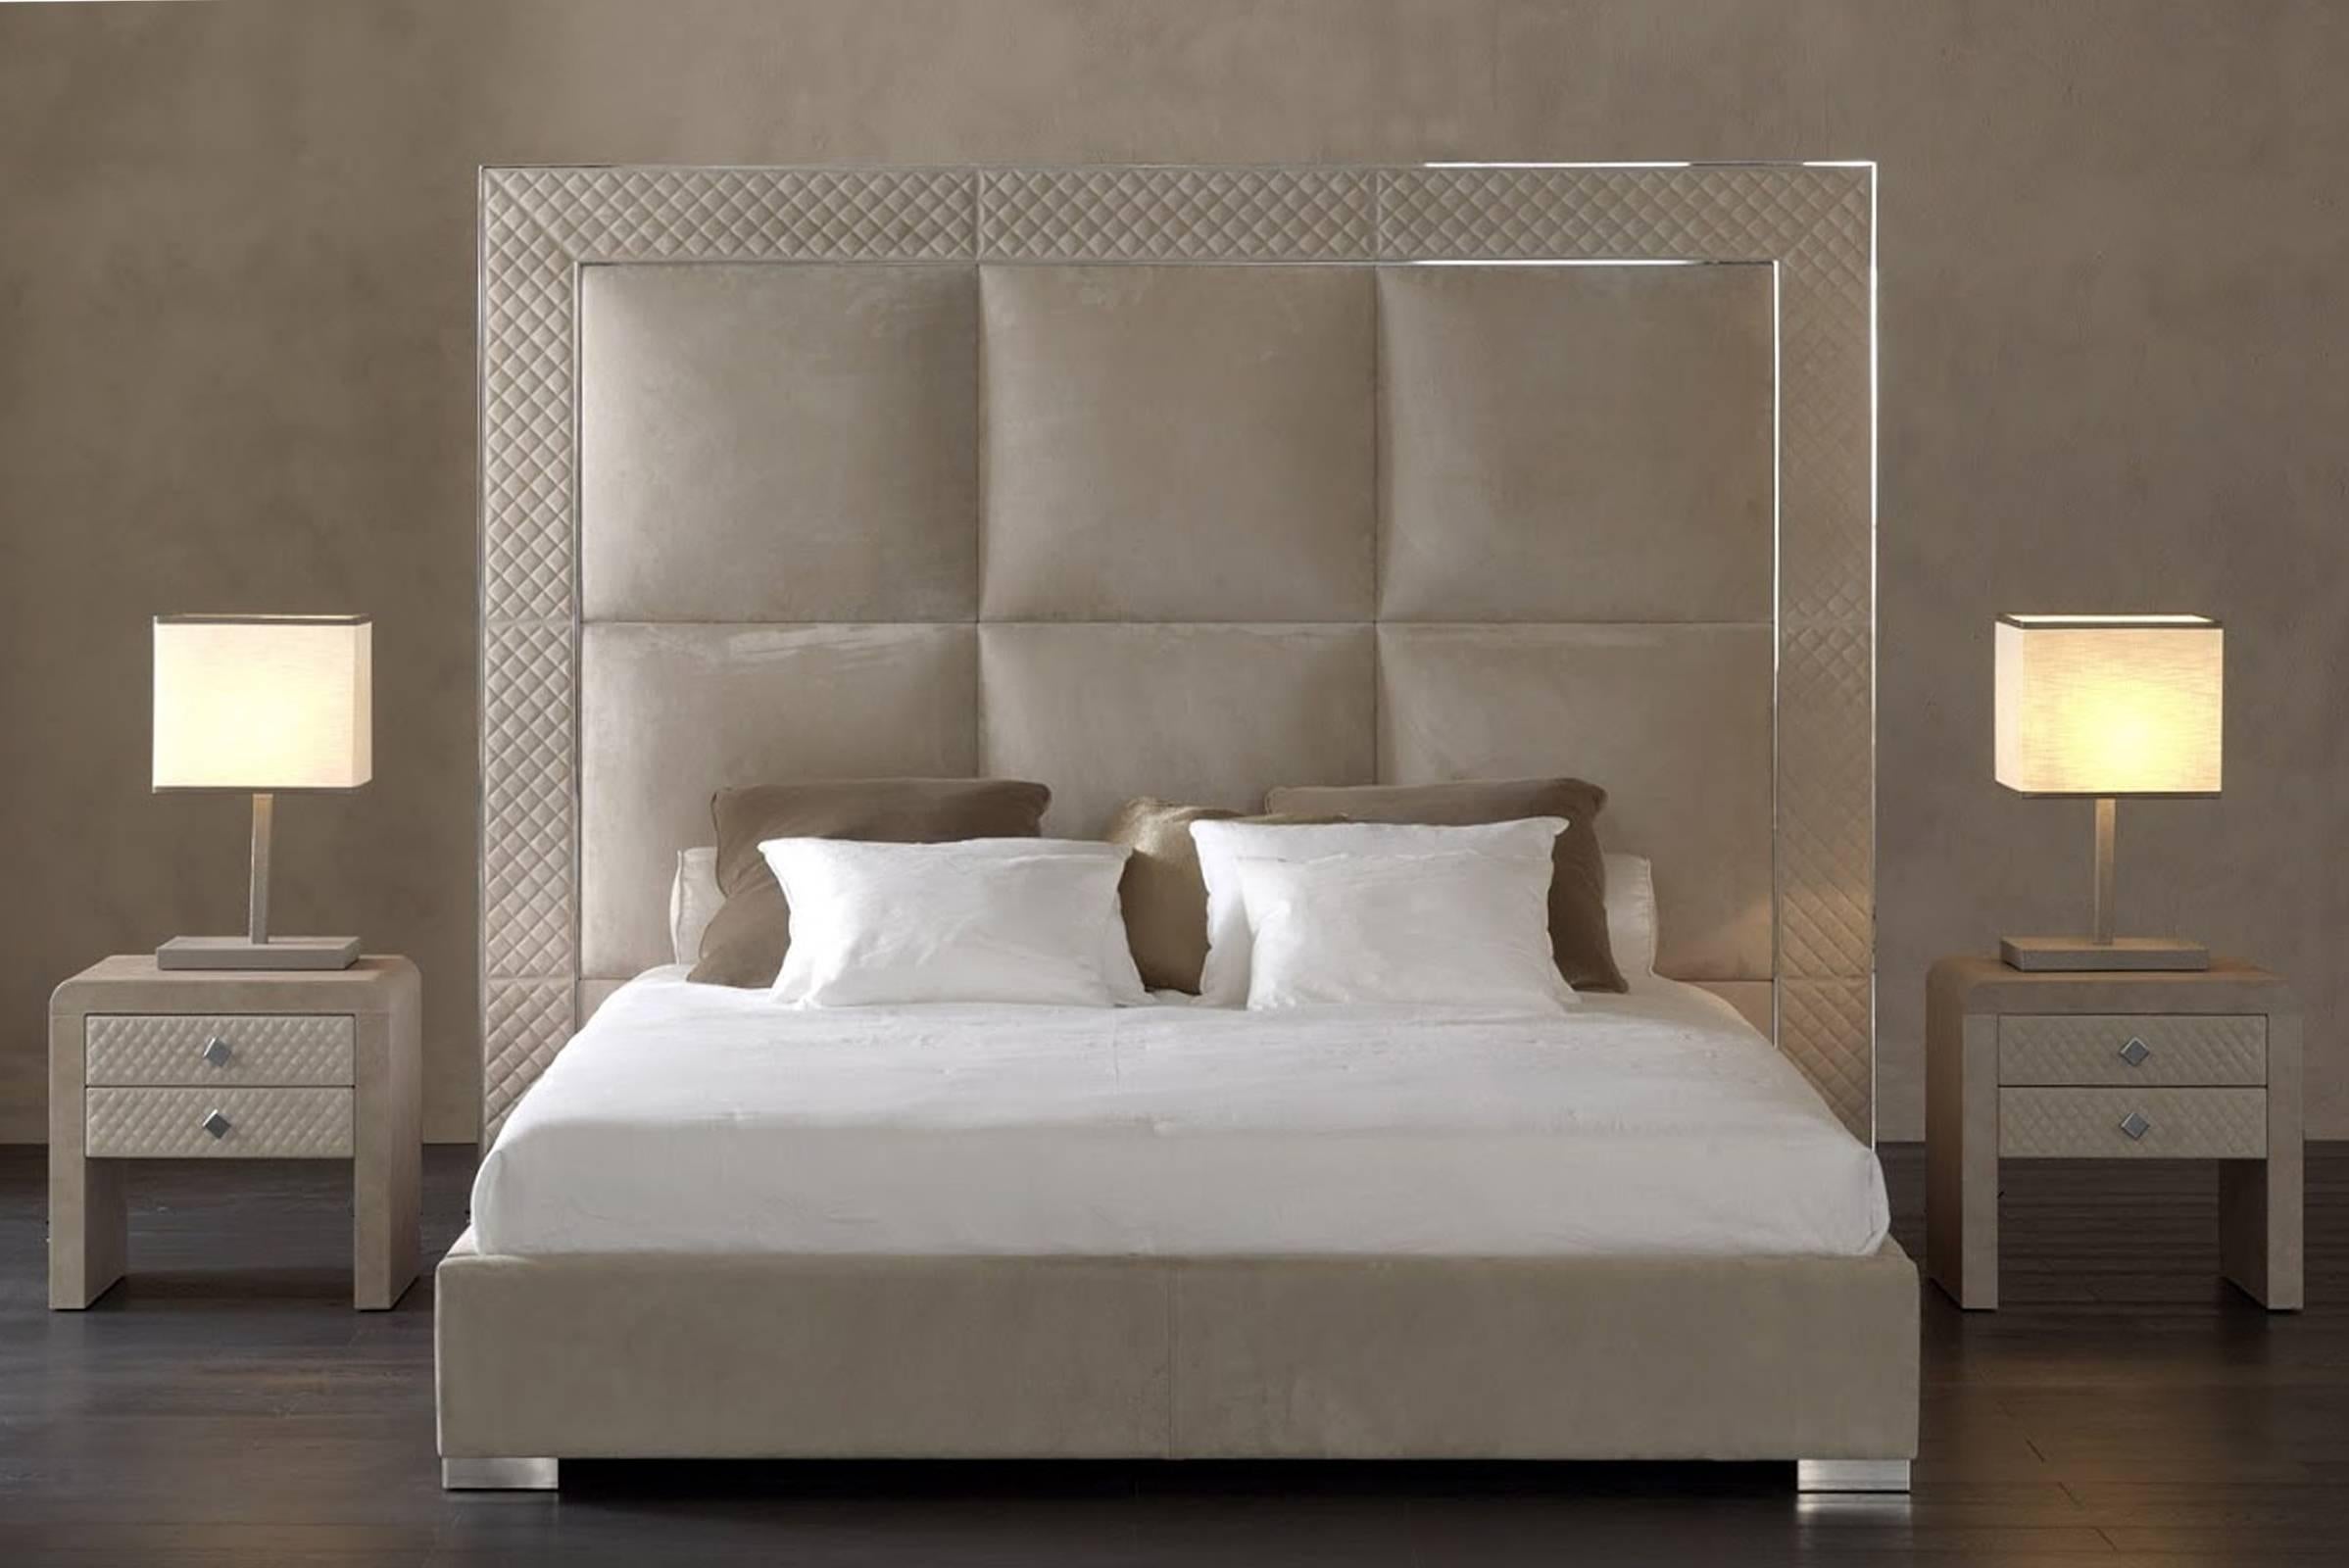 Bed Sigma with low headboard / Slat 200, frame made in steel or bronze
headboard matlassé with soft leather cat. B+C.
Code bed: 2059/200M.
Bed available:
With box, only for Slat 160 or 180.
Slat 160 and 180. 
Upholstery with fabric cat. A,